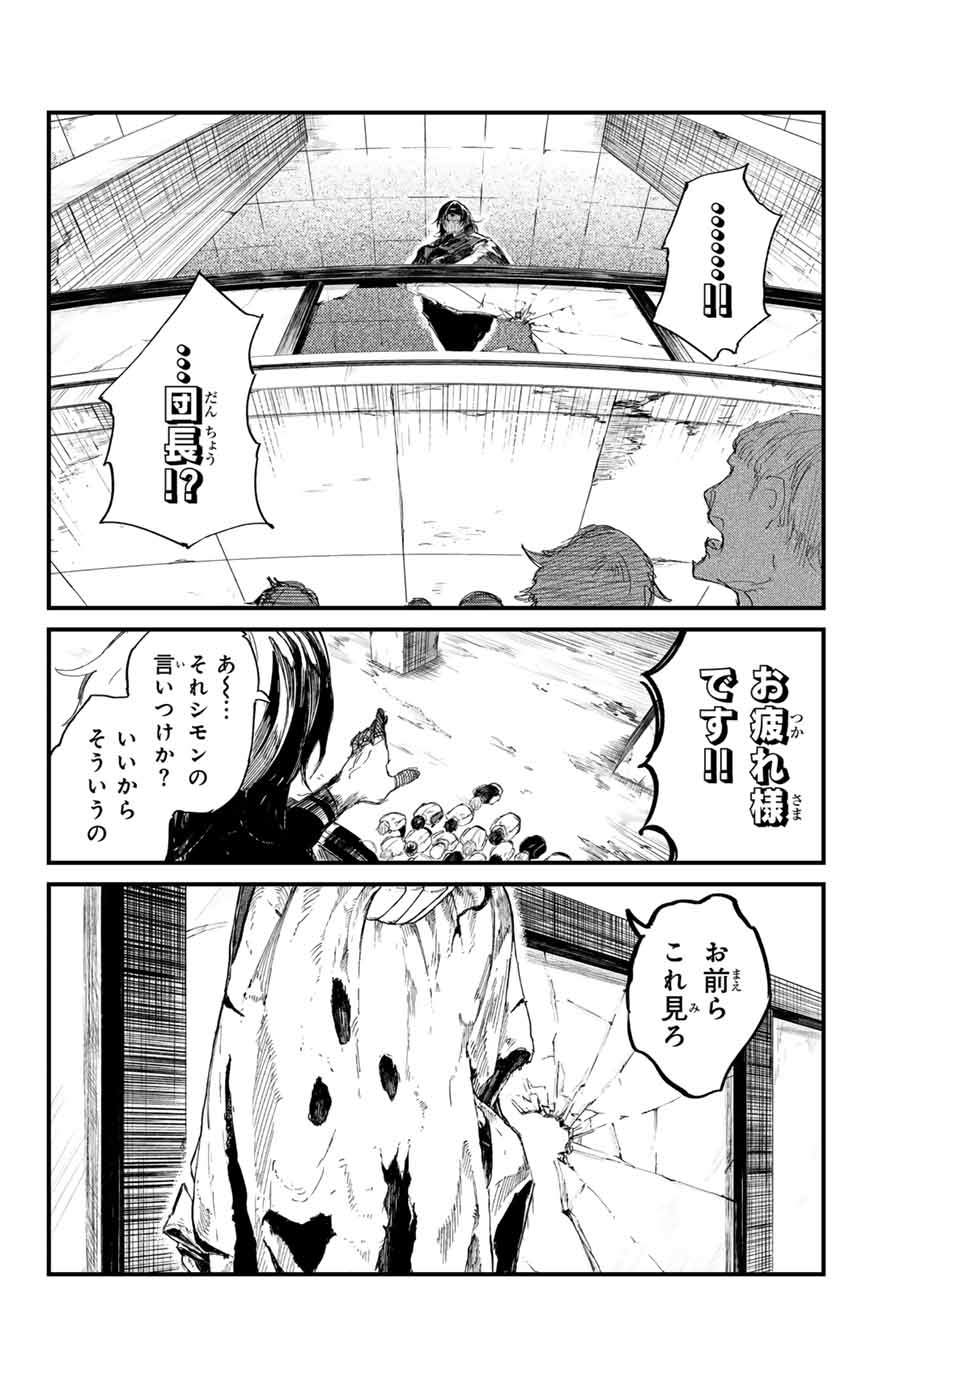 MAN OF RUST 第12話 - Page 12